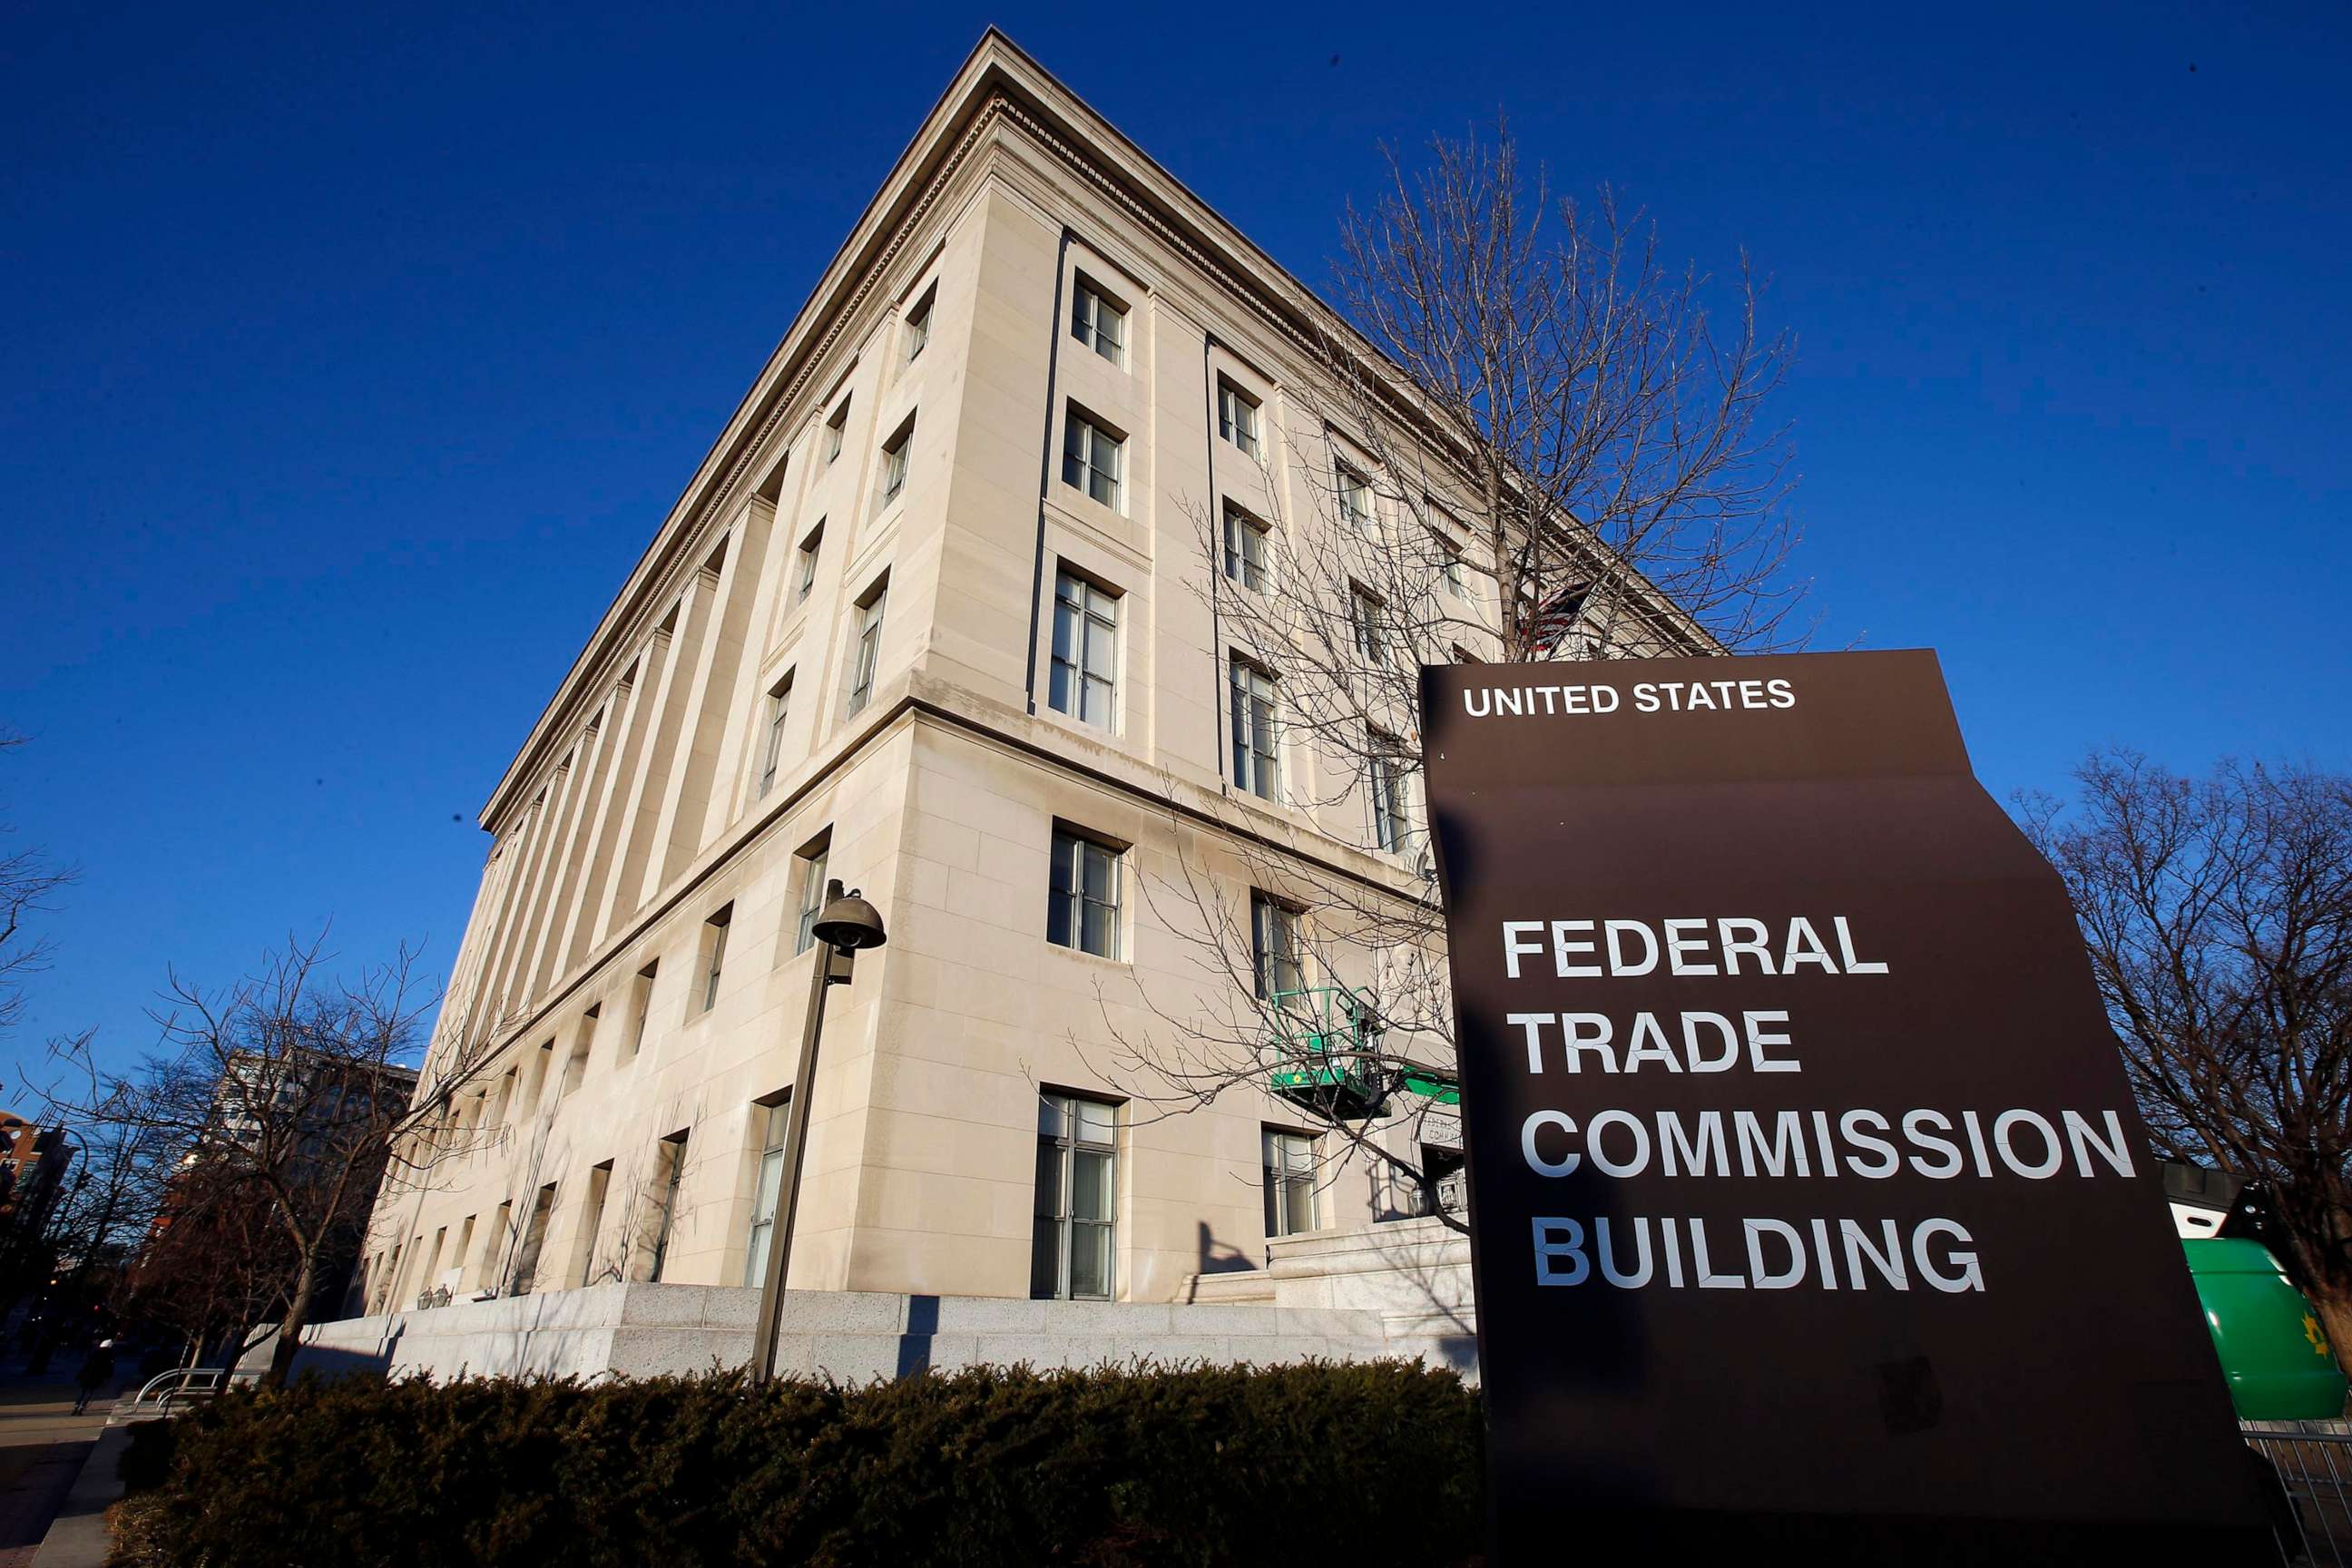 PHOTO: In this Jan. 28, 2015, file photo, the Federal Trade Commission building is shown in Washington , D.C.